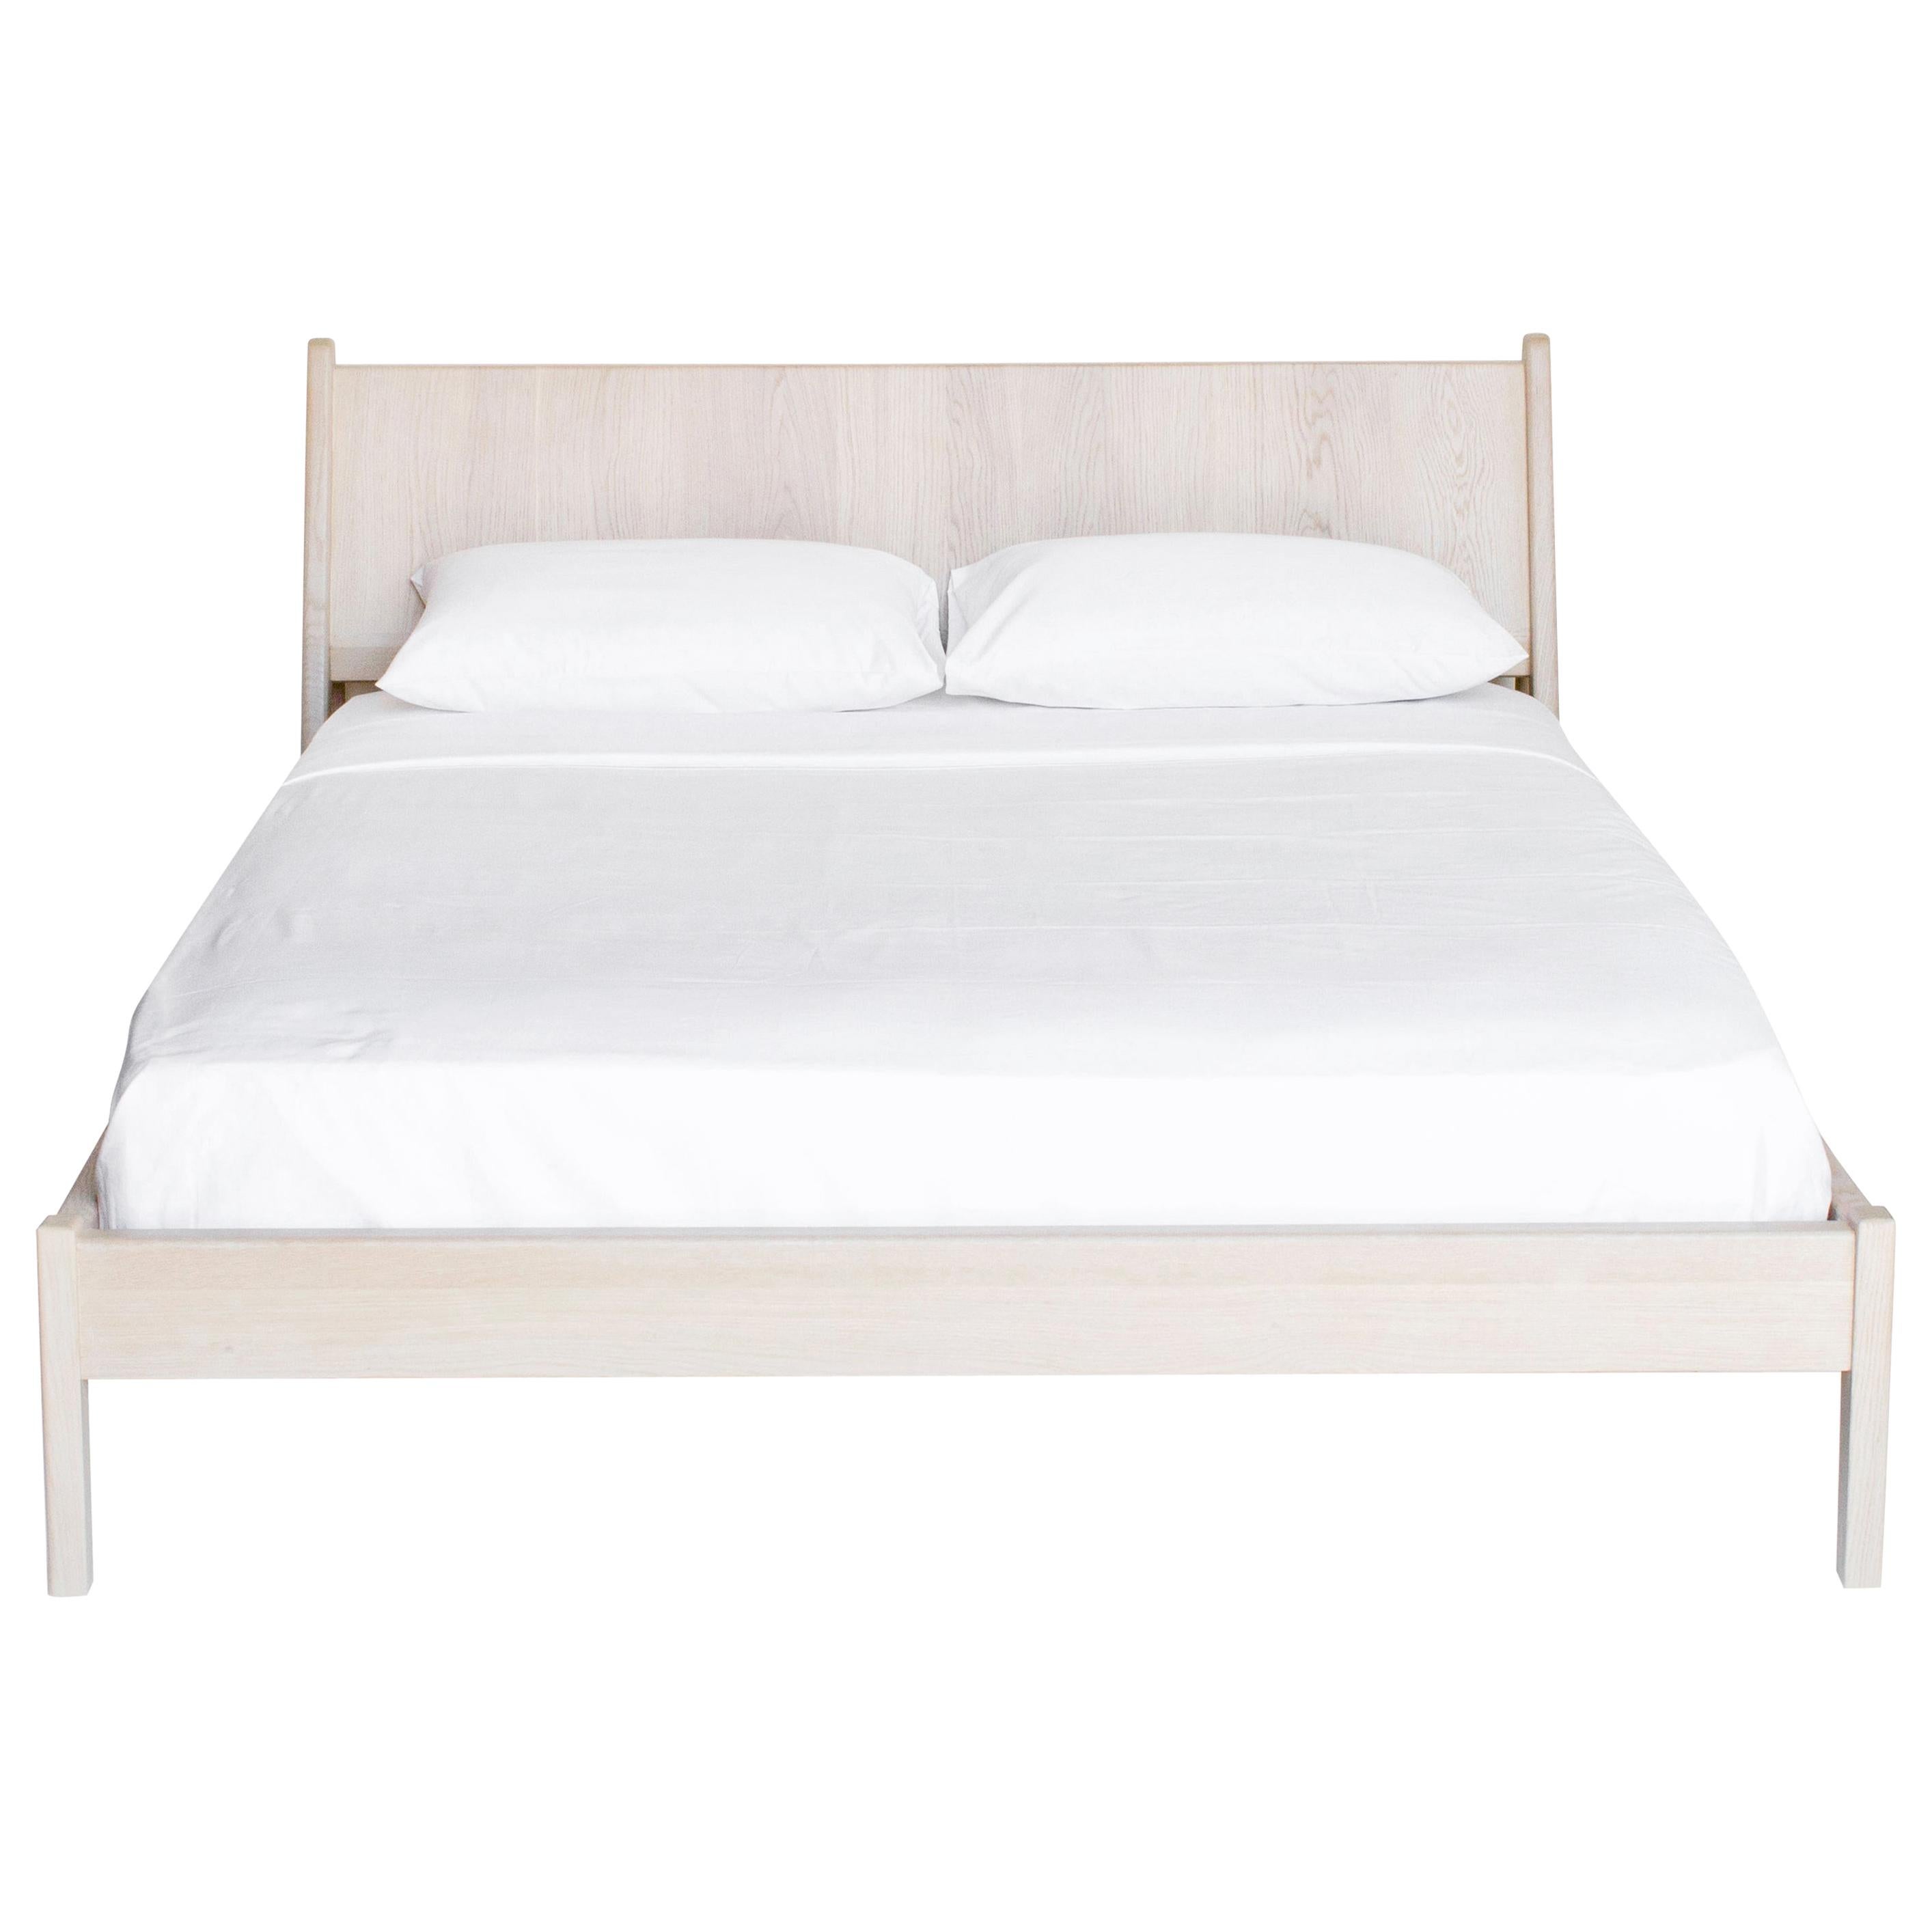 Plume Queen Bed in Nude by Sun at Six, Minimalist Wood Bed